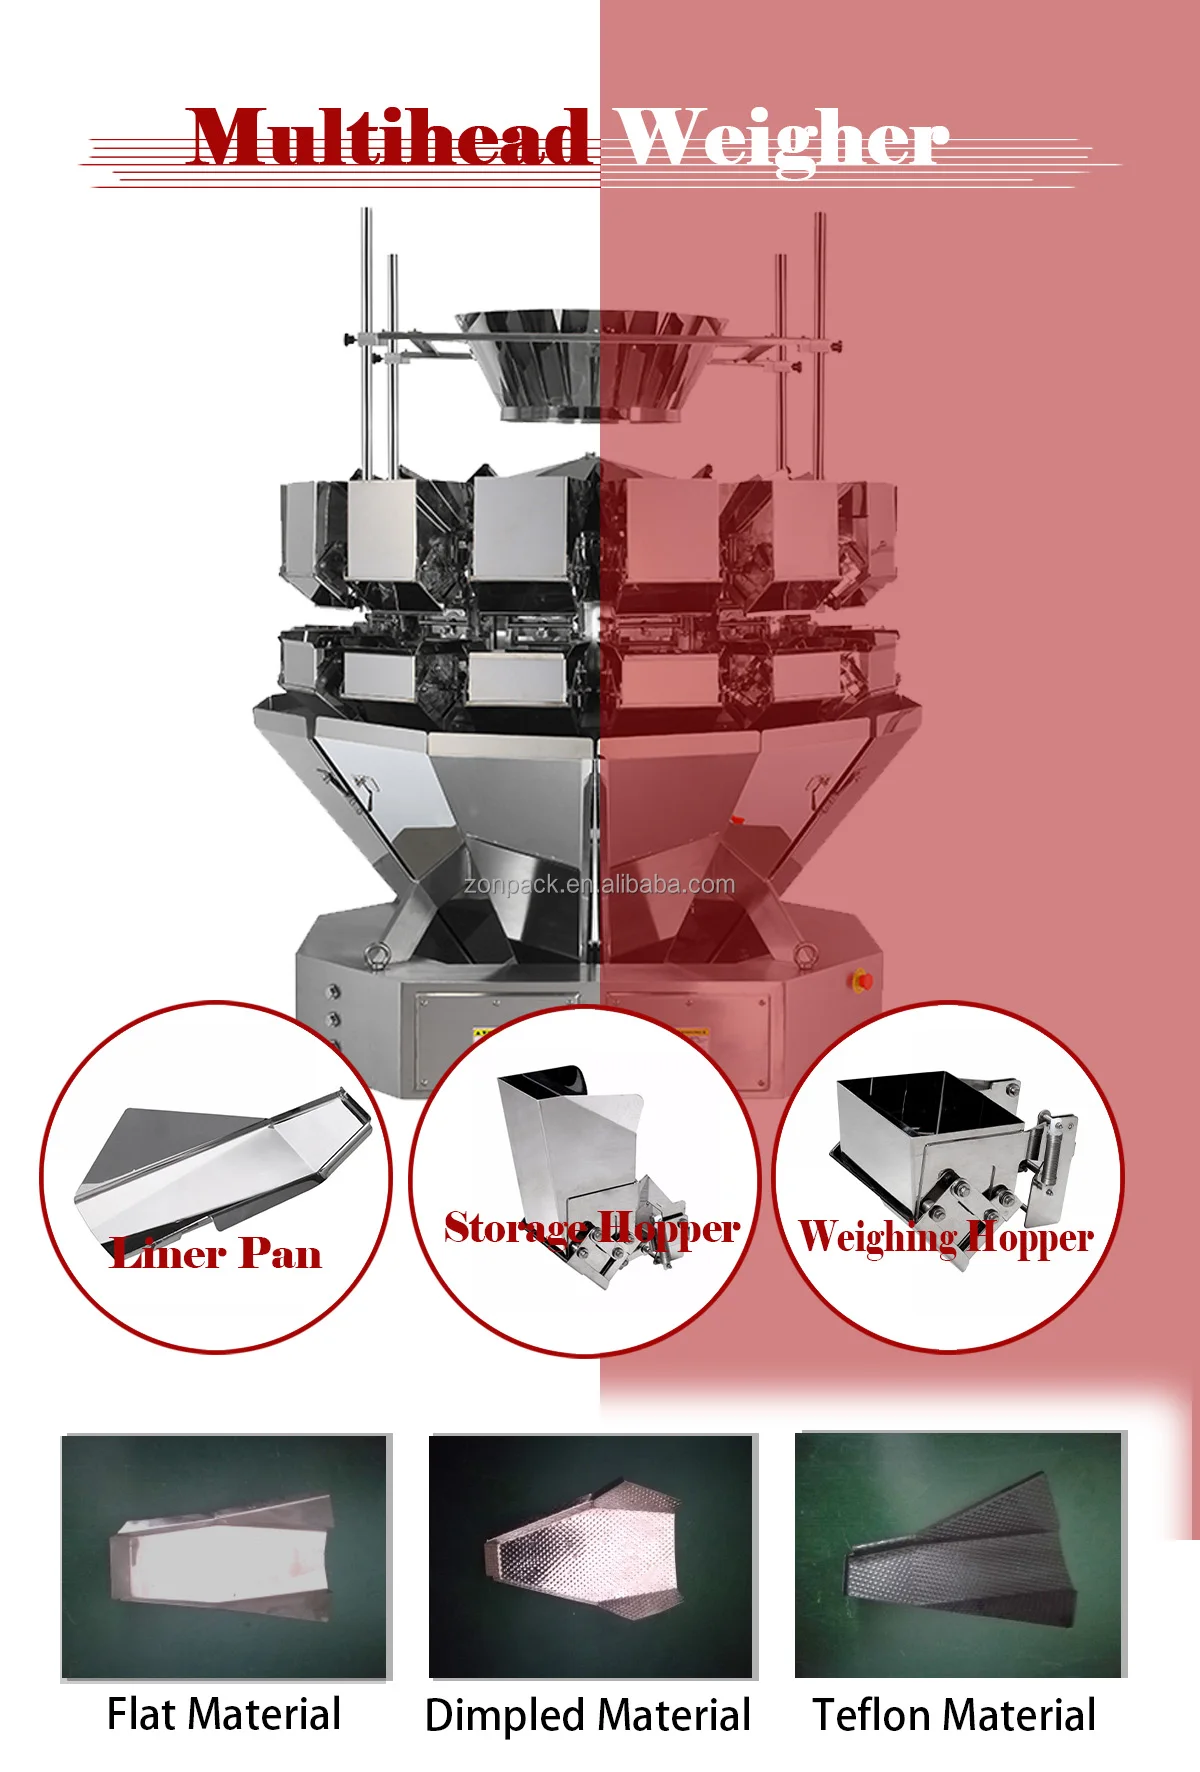 Combination Multihead Weigher Machine,Multi Head Weighing Scale for frozen fish/meat/chicken